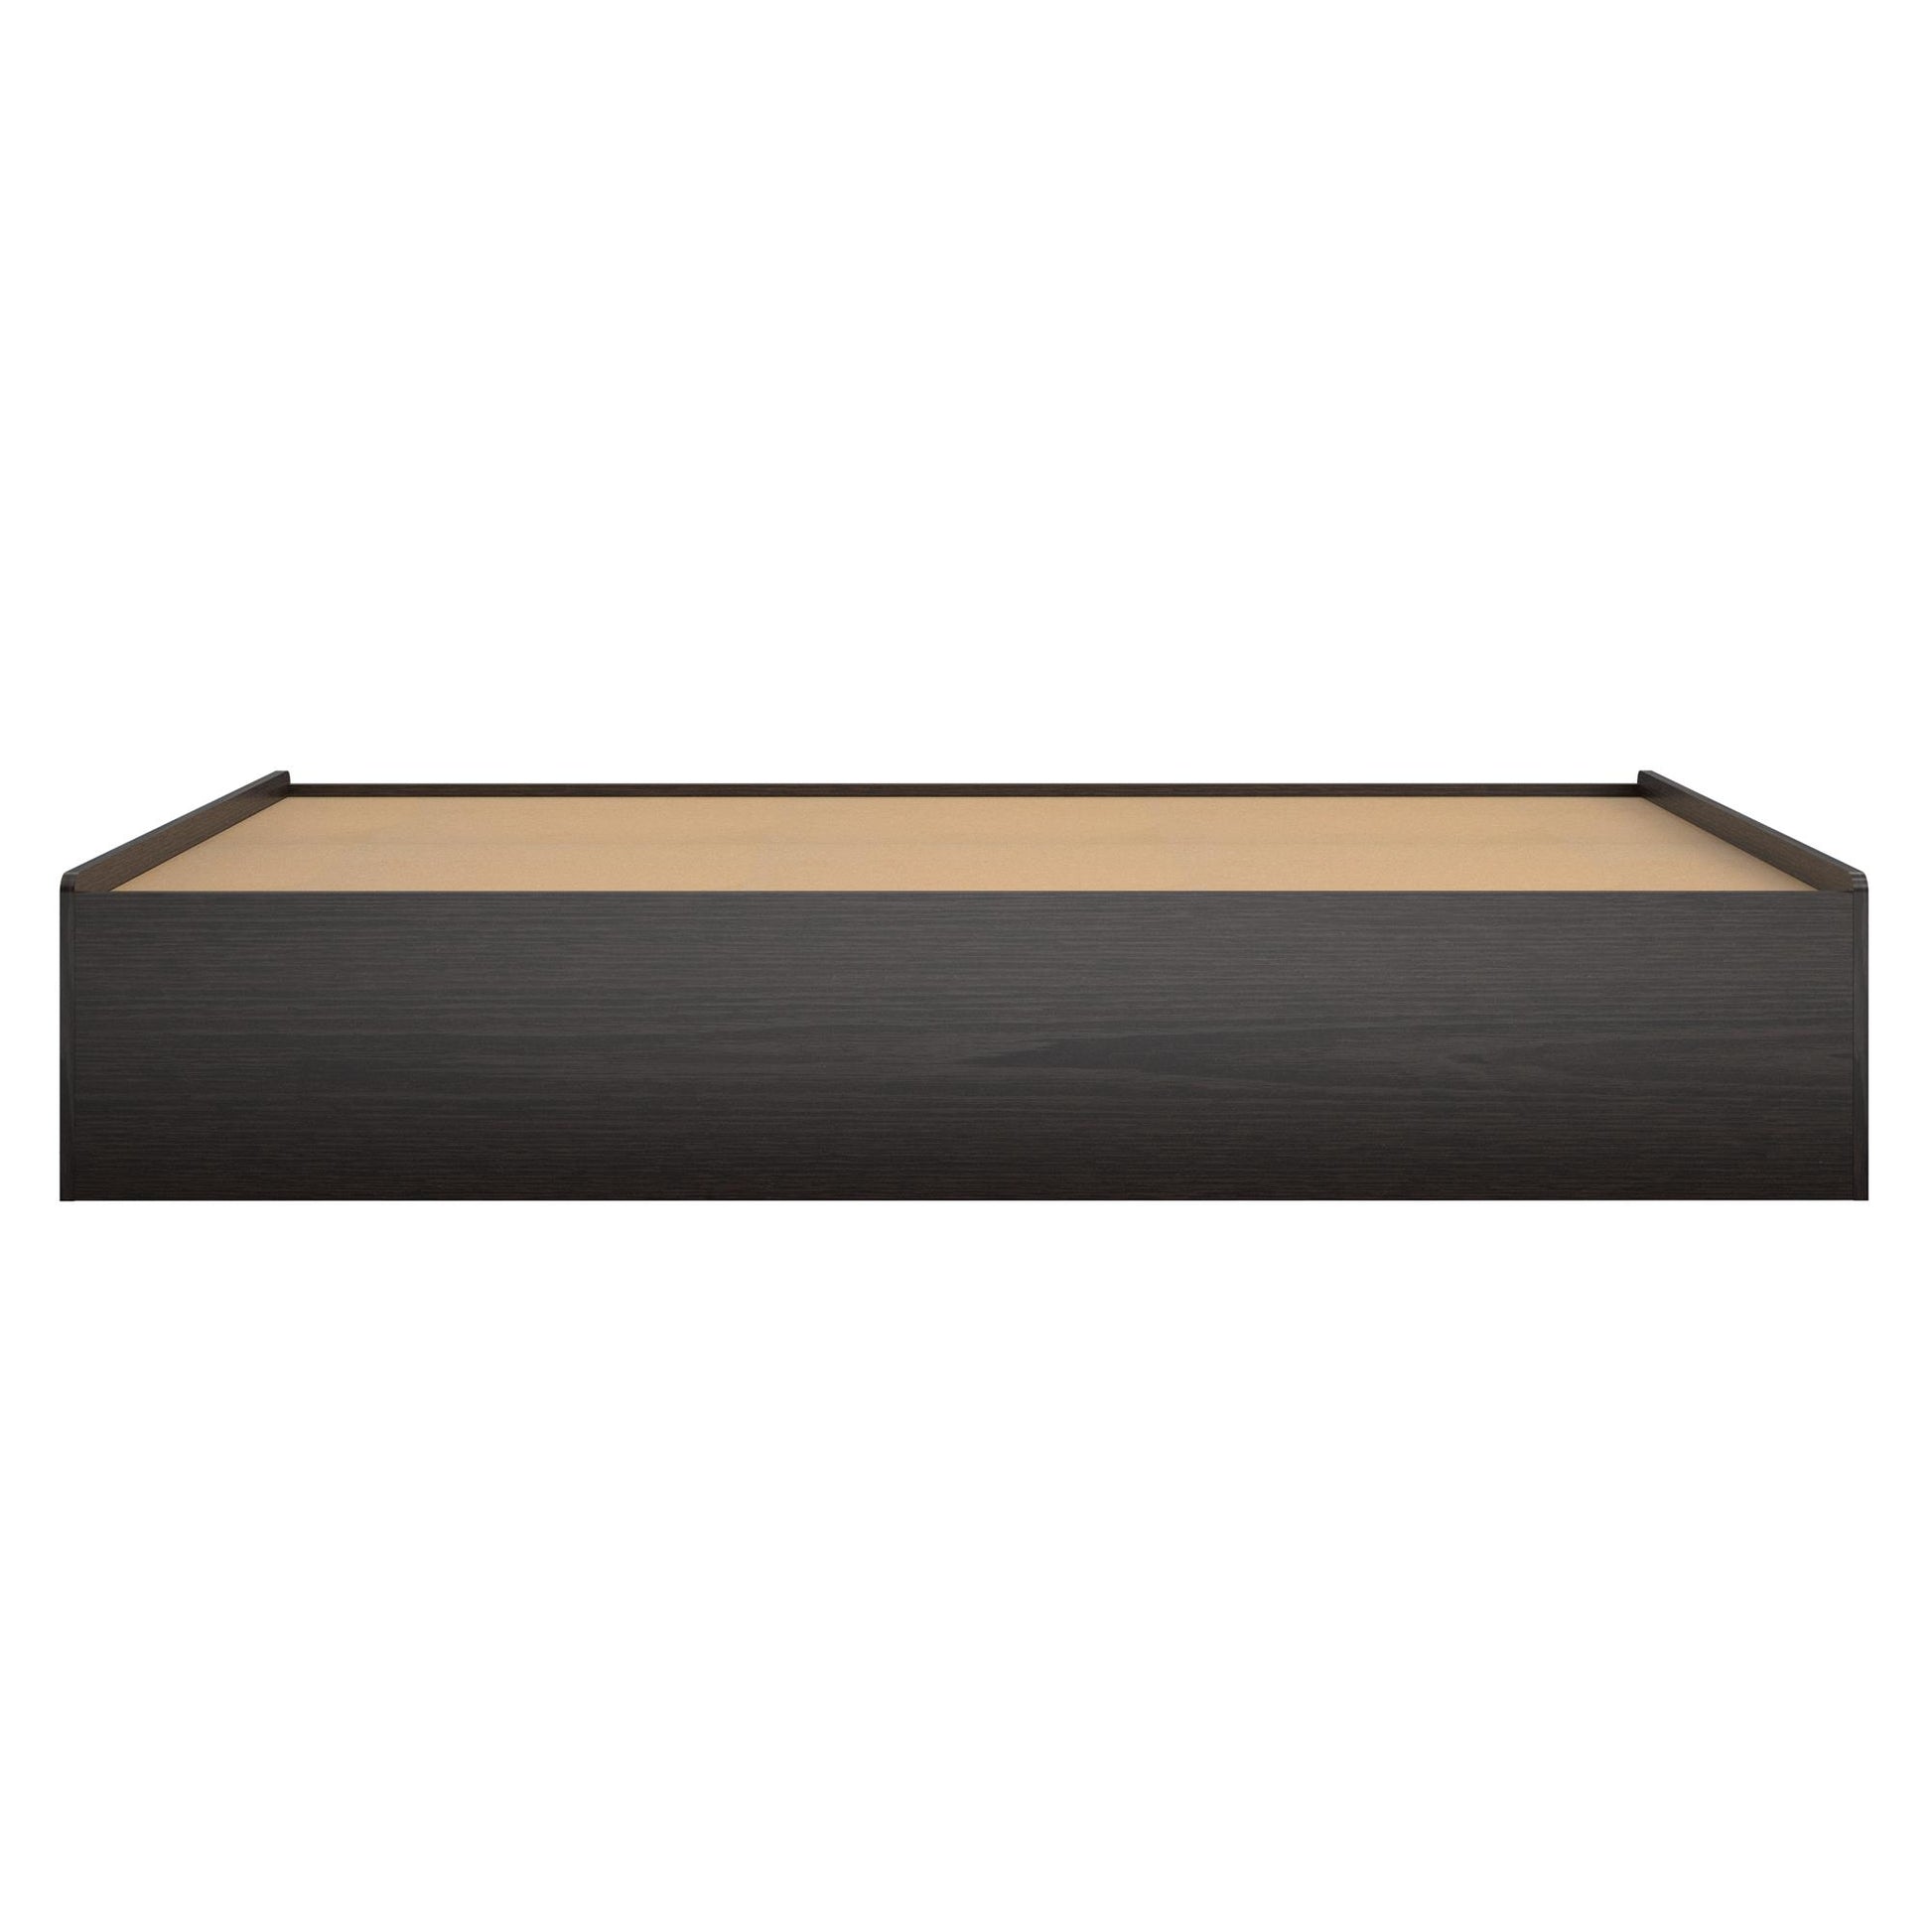 Platform Bed with 2 Large Storage Drawers and No Box Spring Required - Espresso - Twin